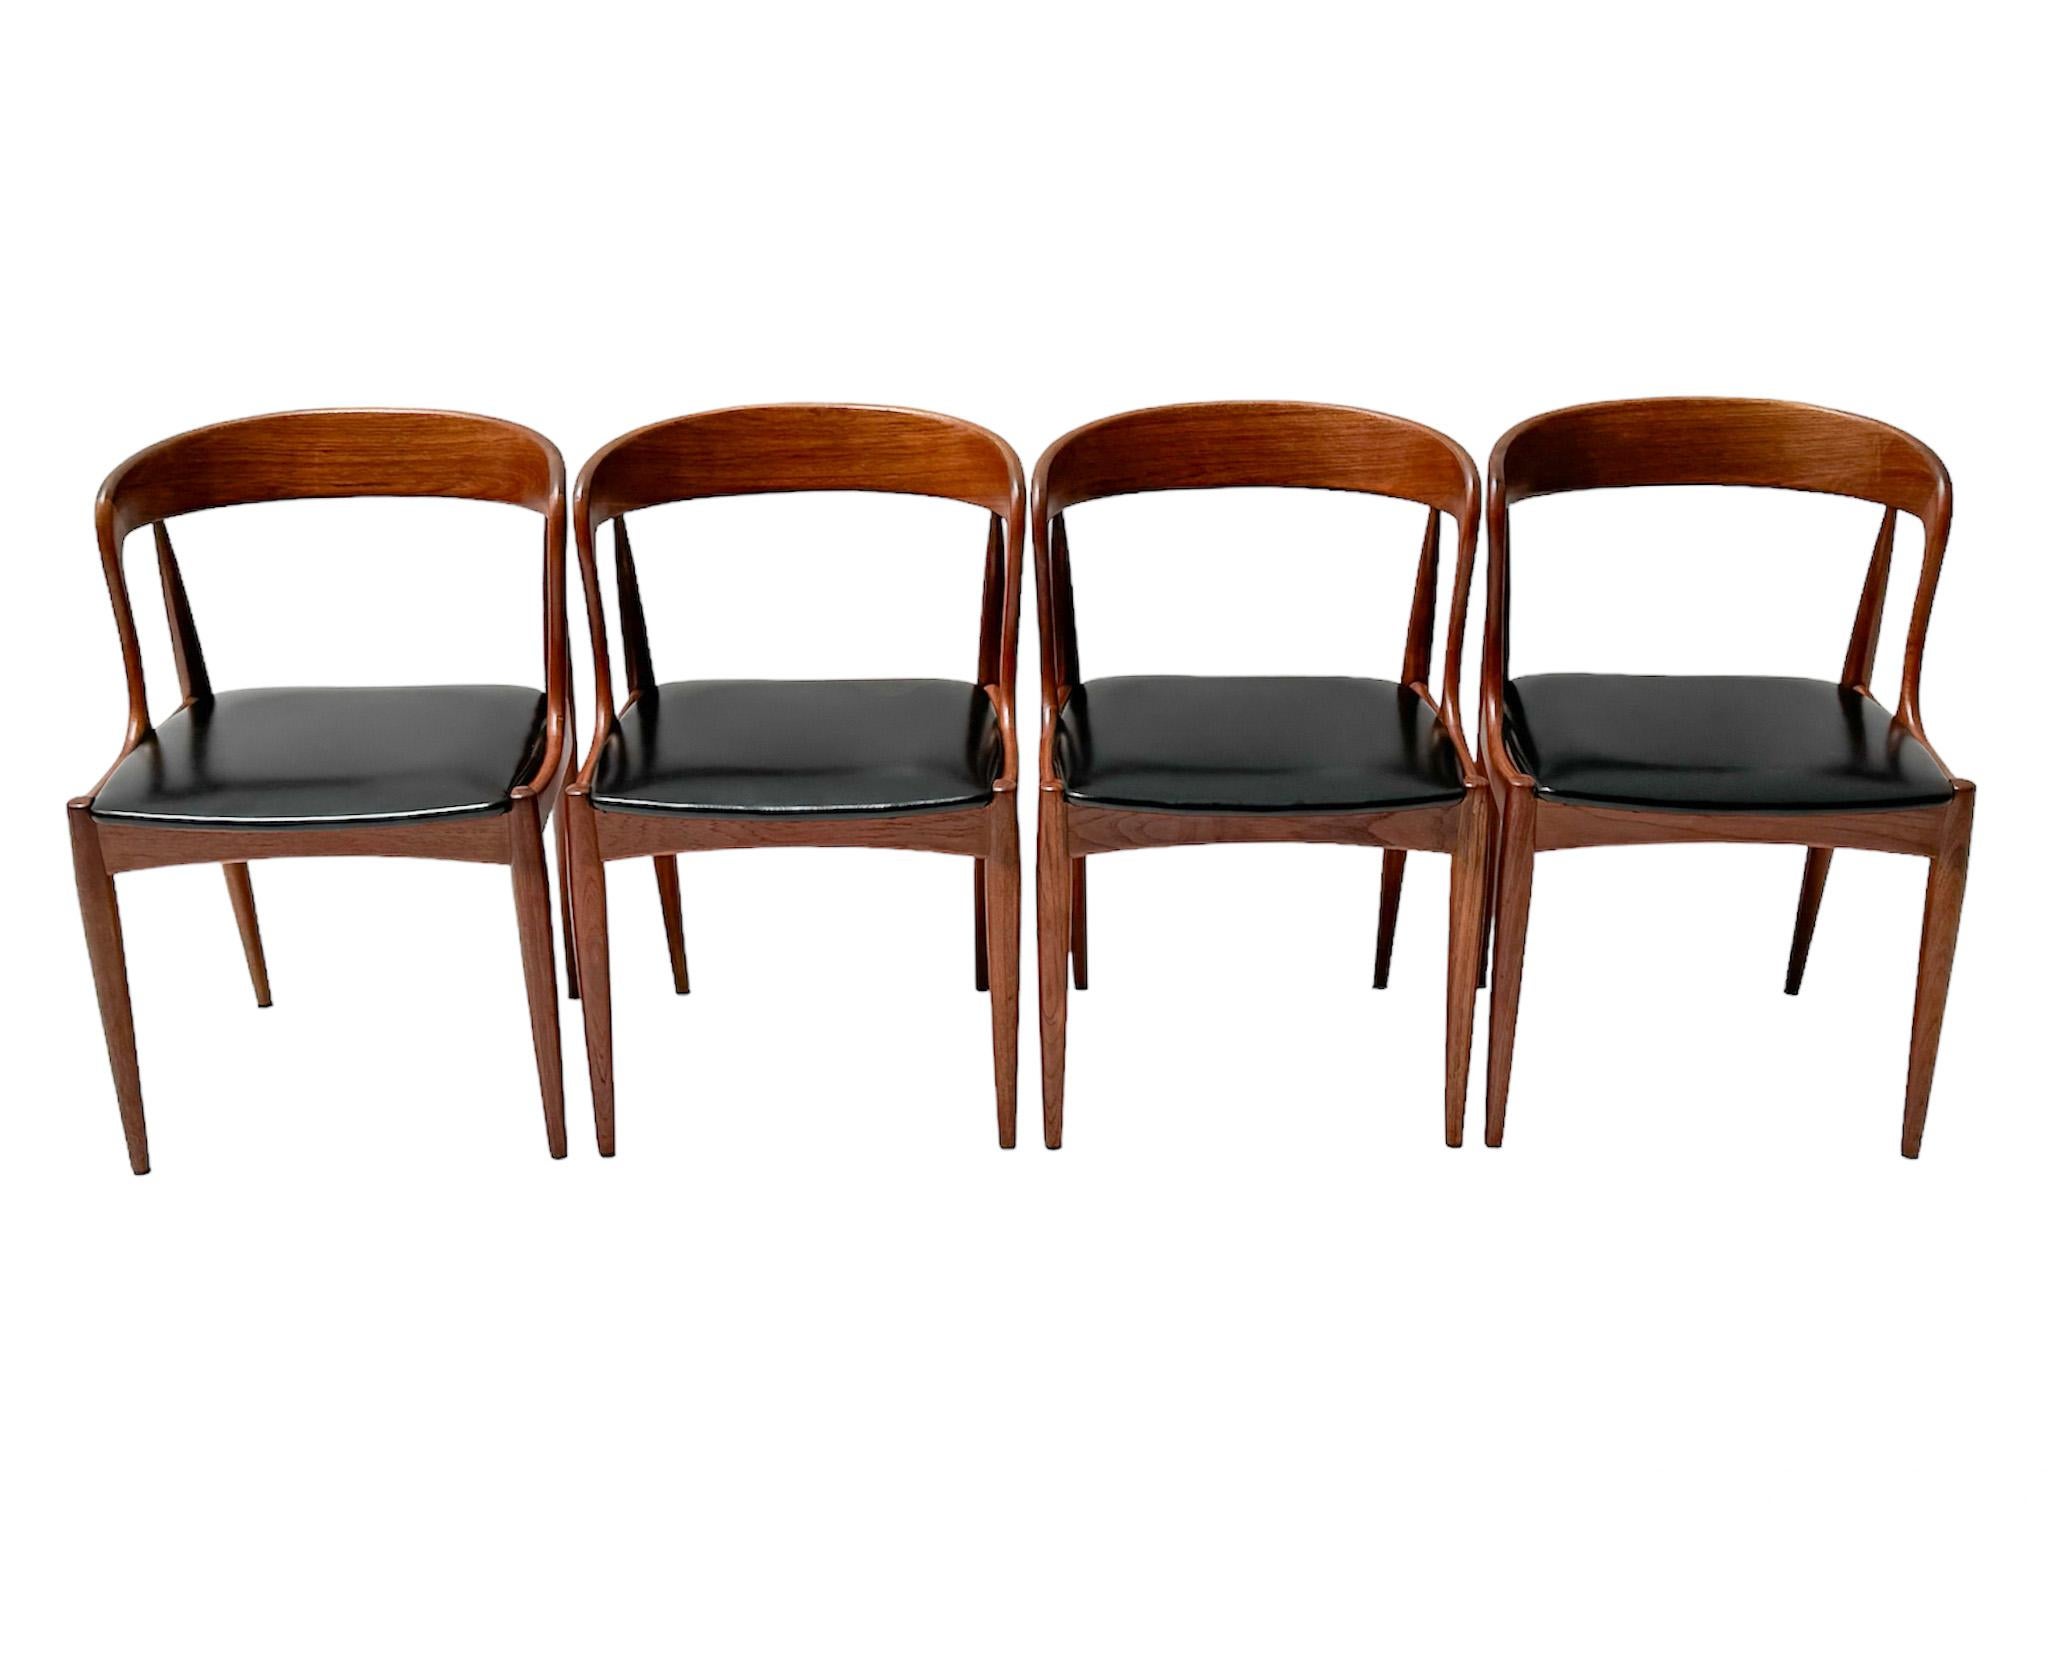 Stunning and elegant set of four Mid-Century Modern Model 16 dining chairs.
Design by Johannes Andersen for Uldum Møbelfabrik.
Striking Danish design from the 1960s.
Original solid teak frames with original black faux leather seats.
Marked with